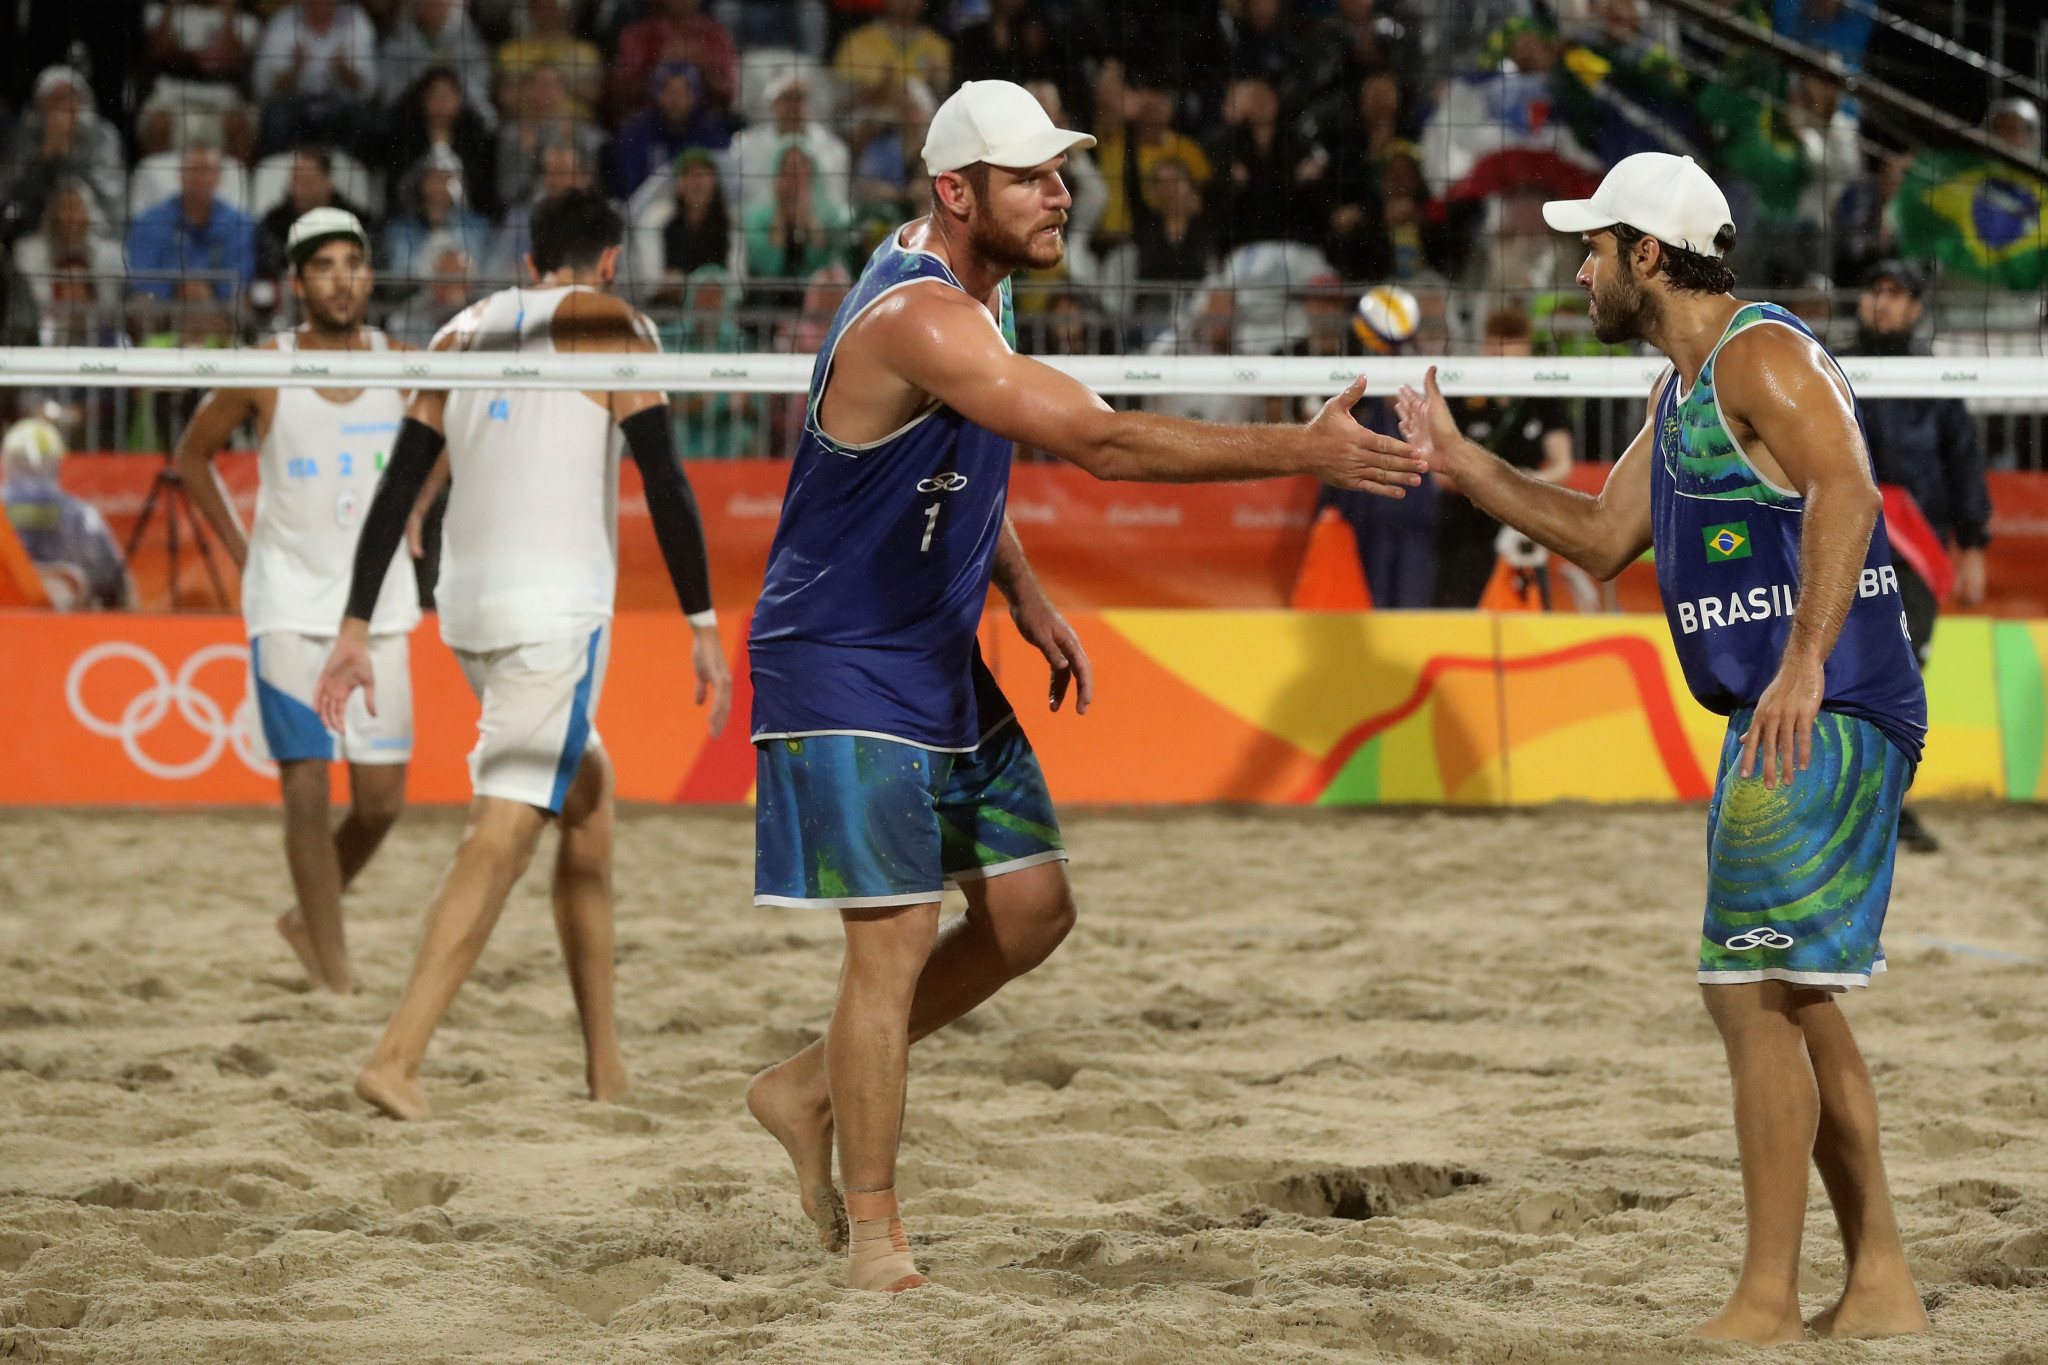 Beach volleyball was named as the sport with the best production at Rio 2016 ©Getty Images